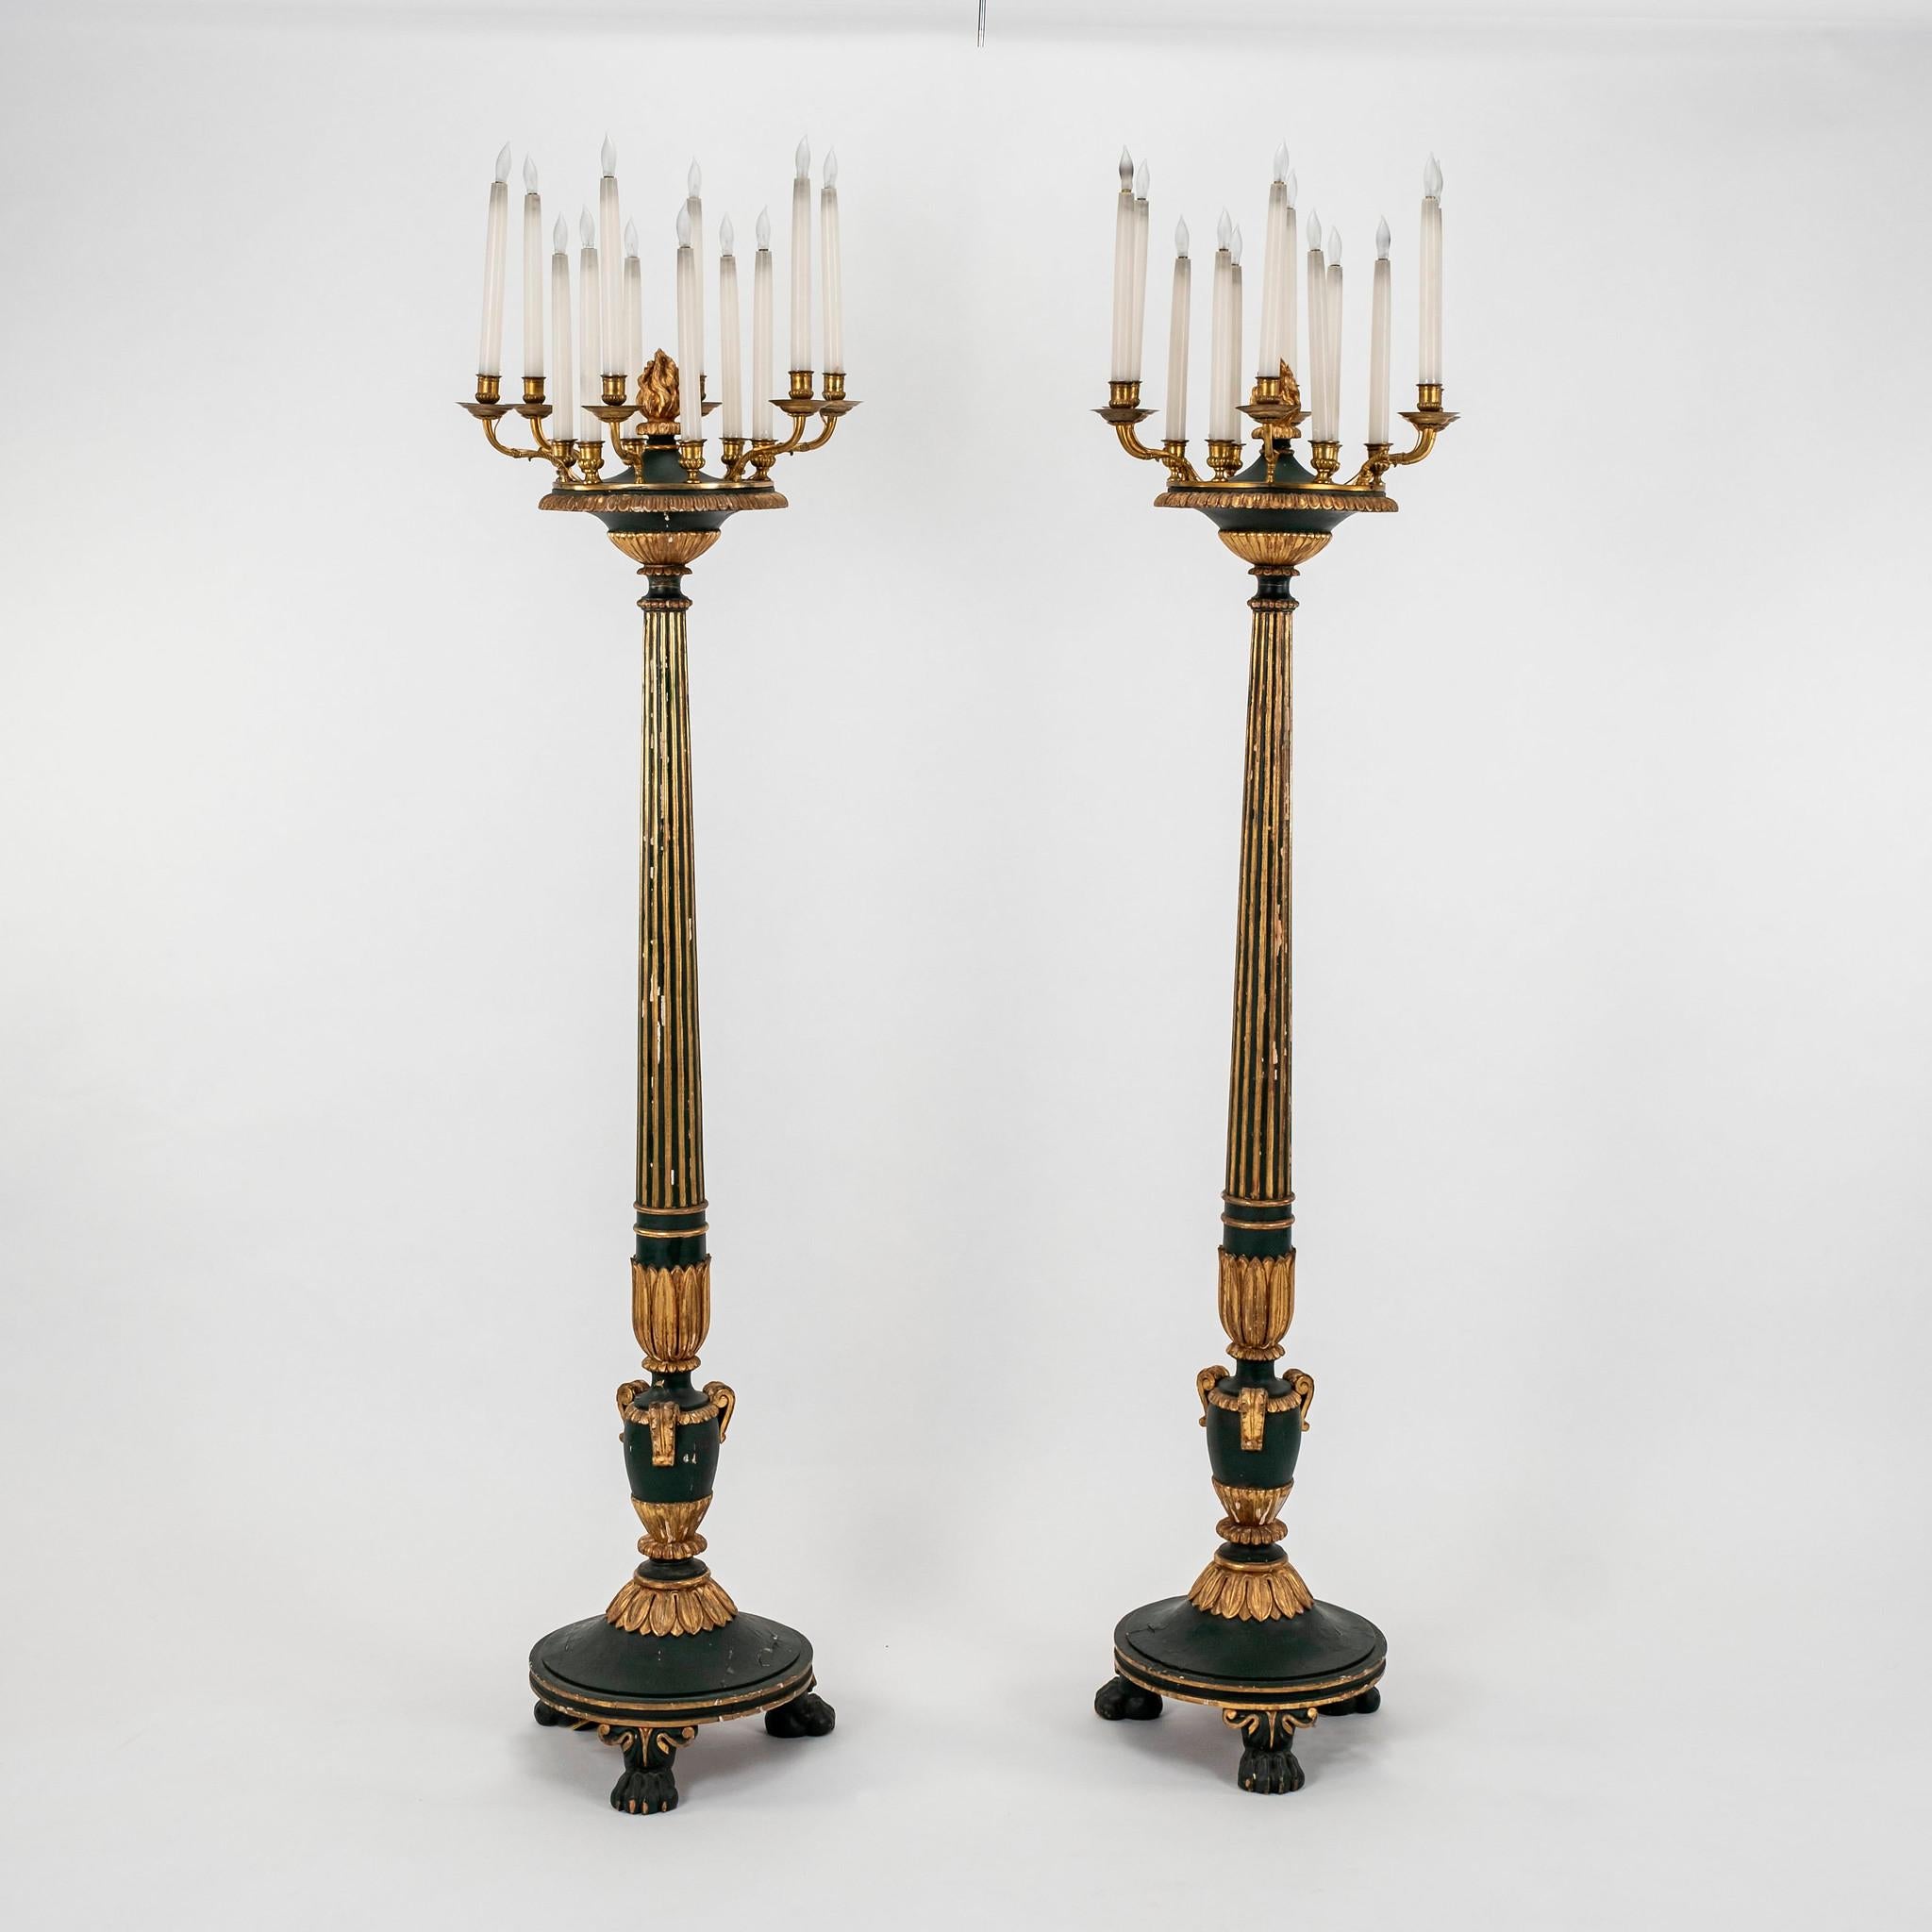 Gilt Pair of 19th Century French Louis XVI Style Torchieres For Sale